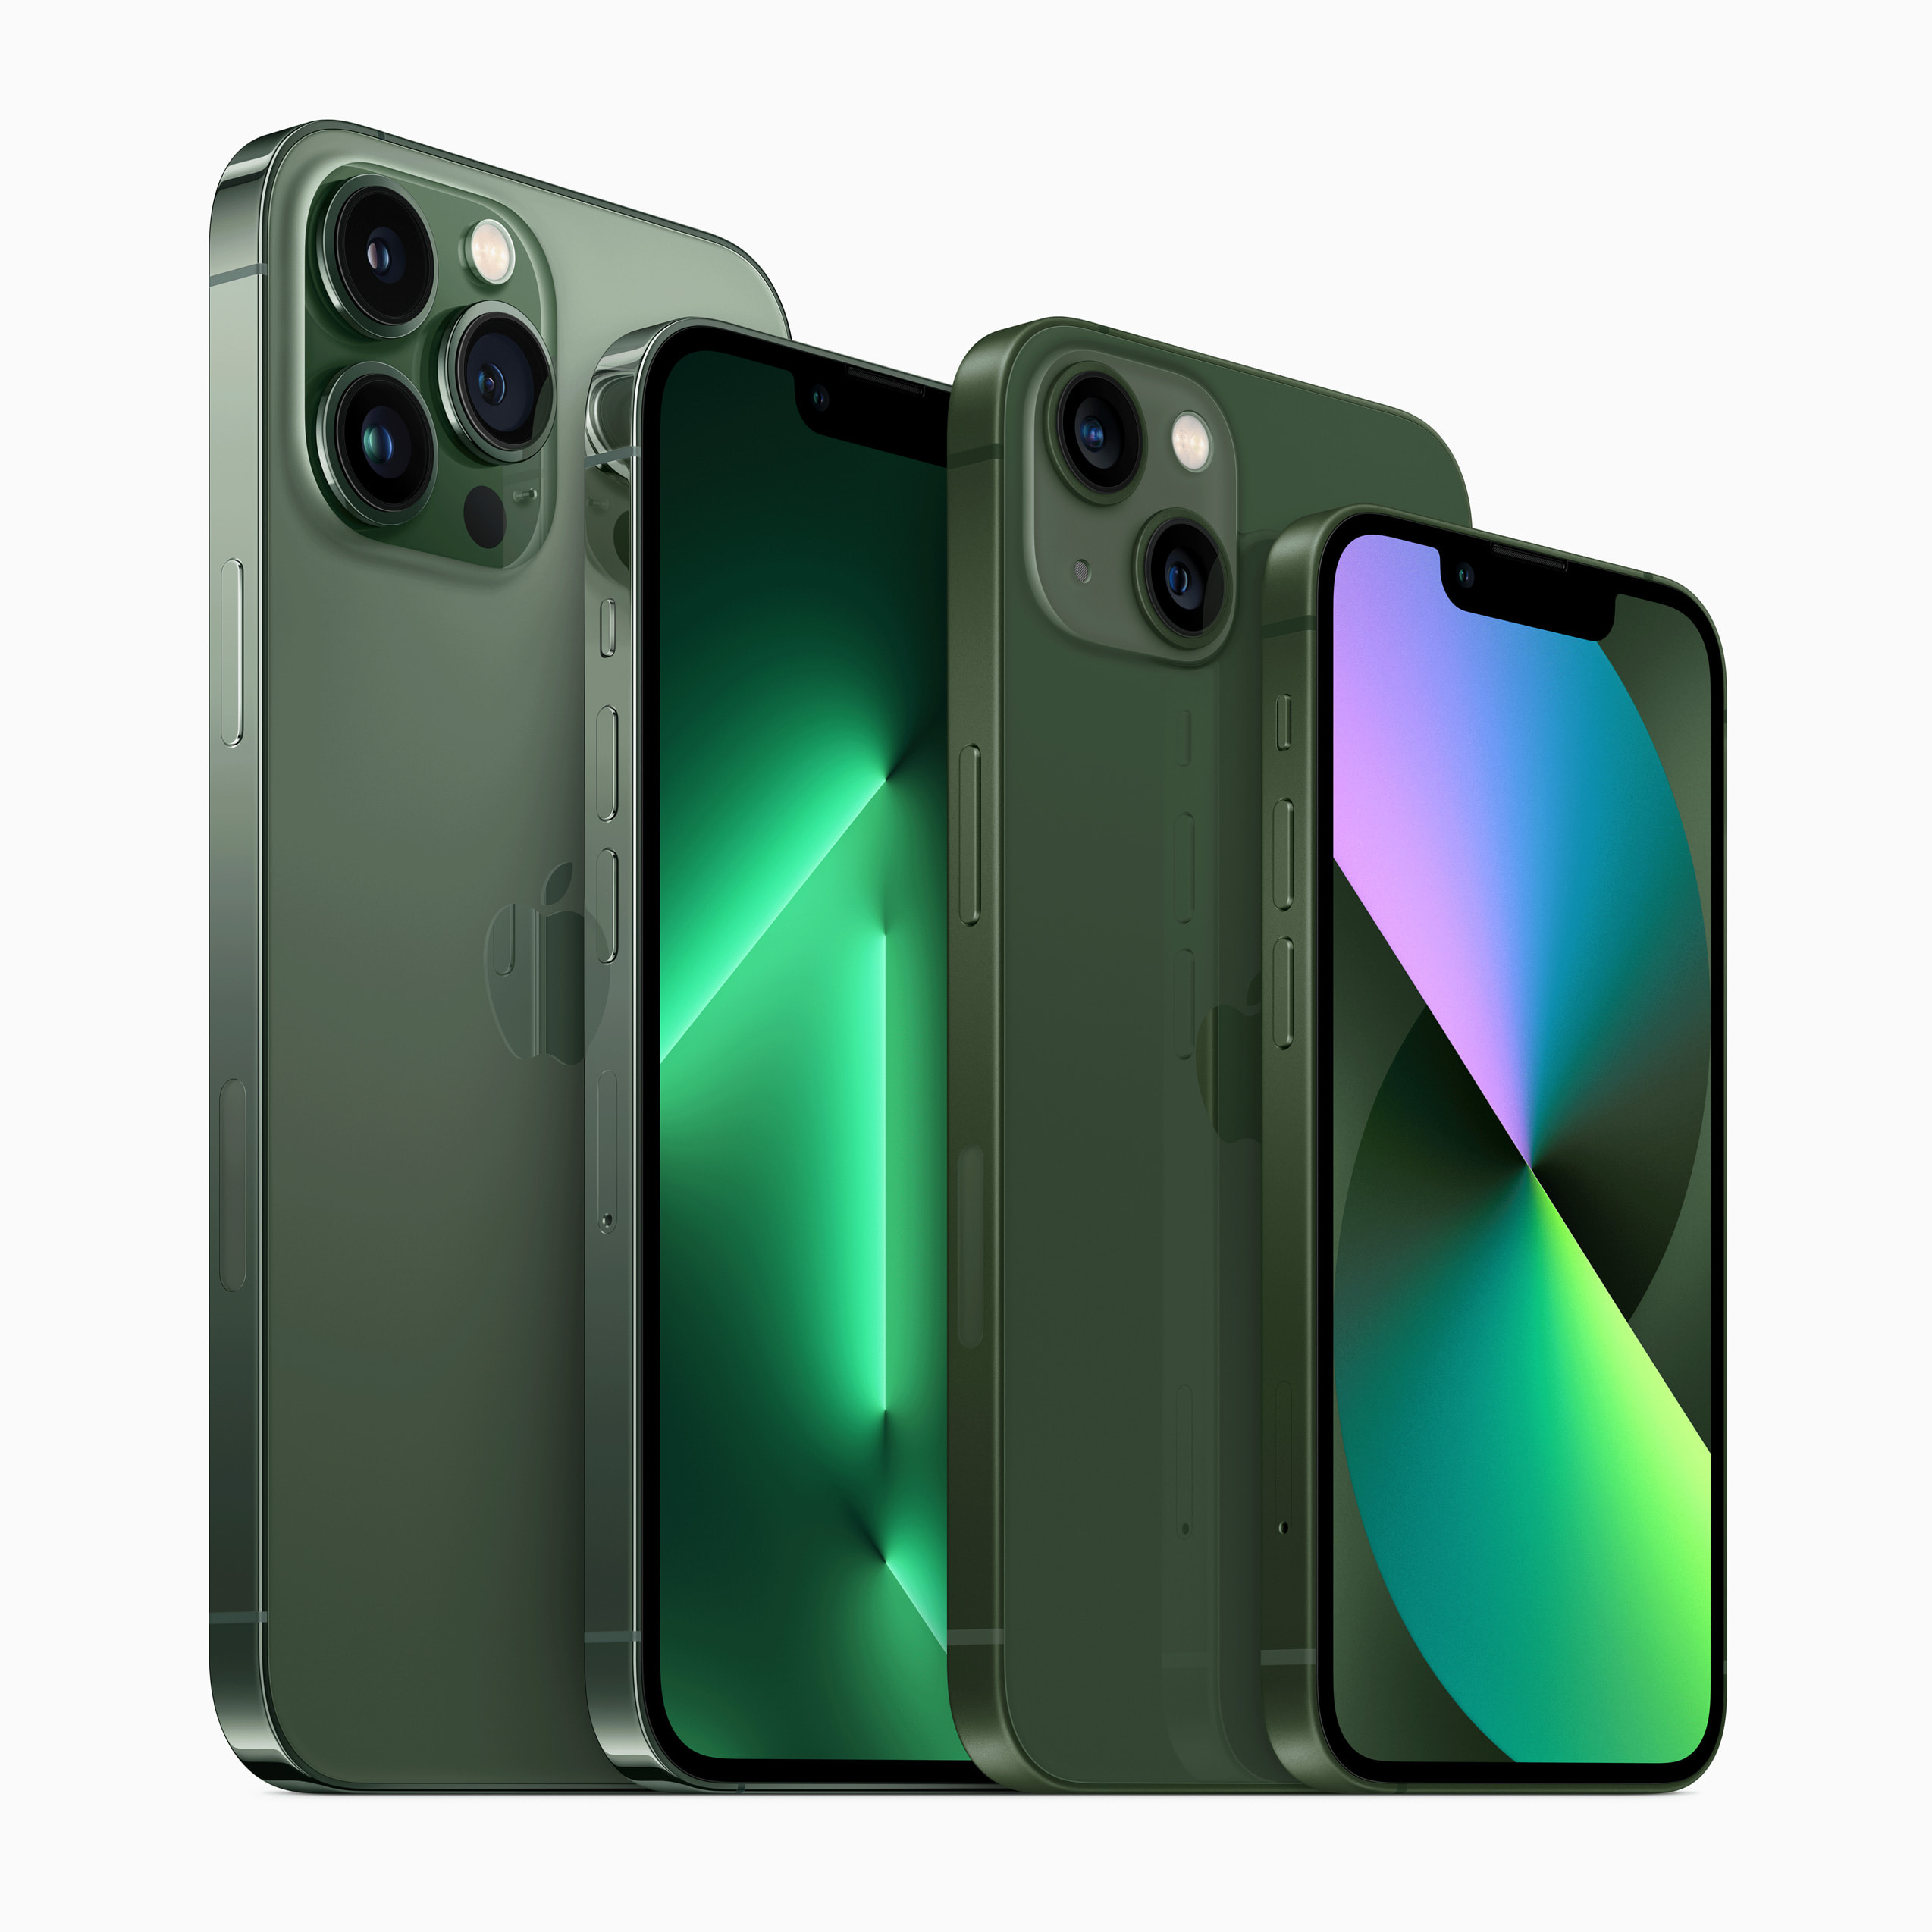 Do they make a green iPhone?